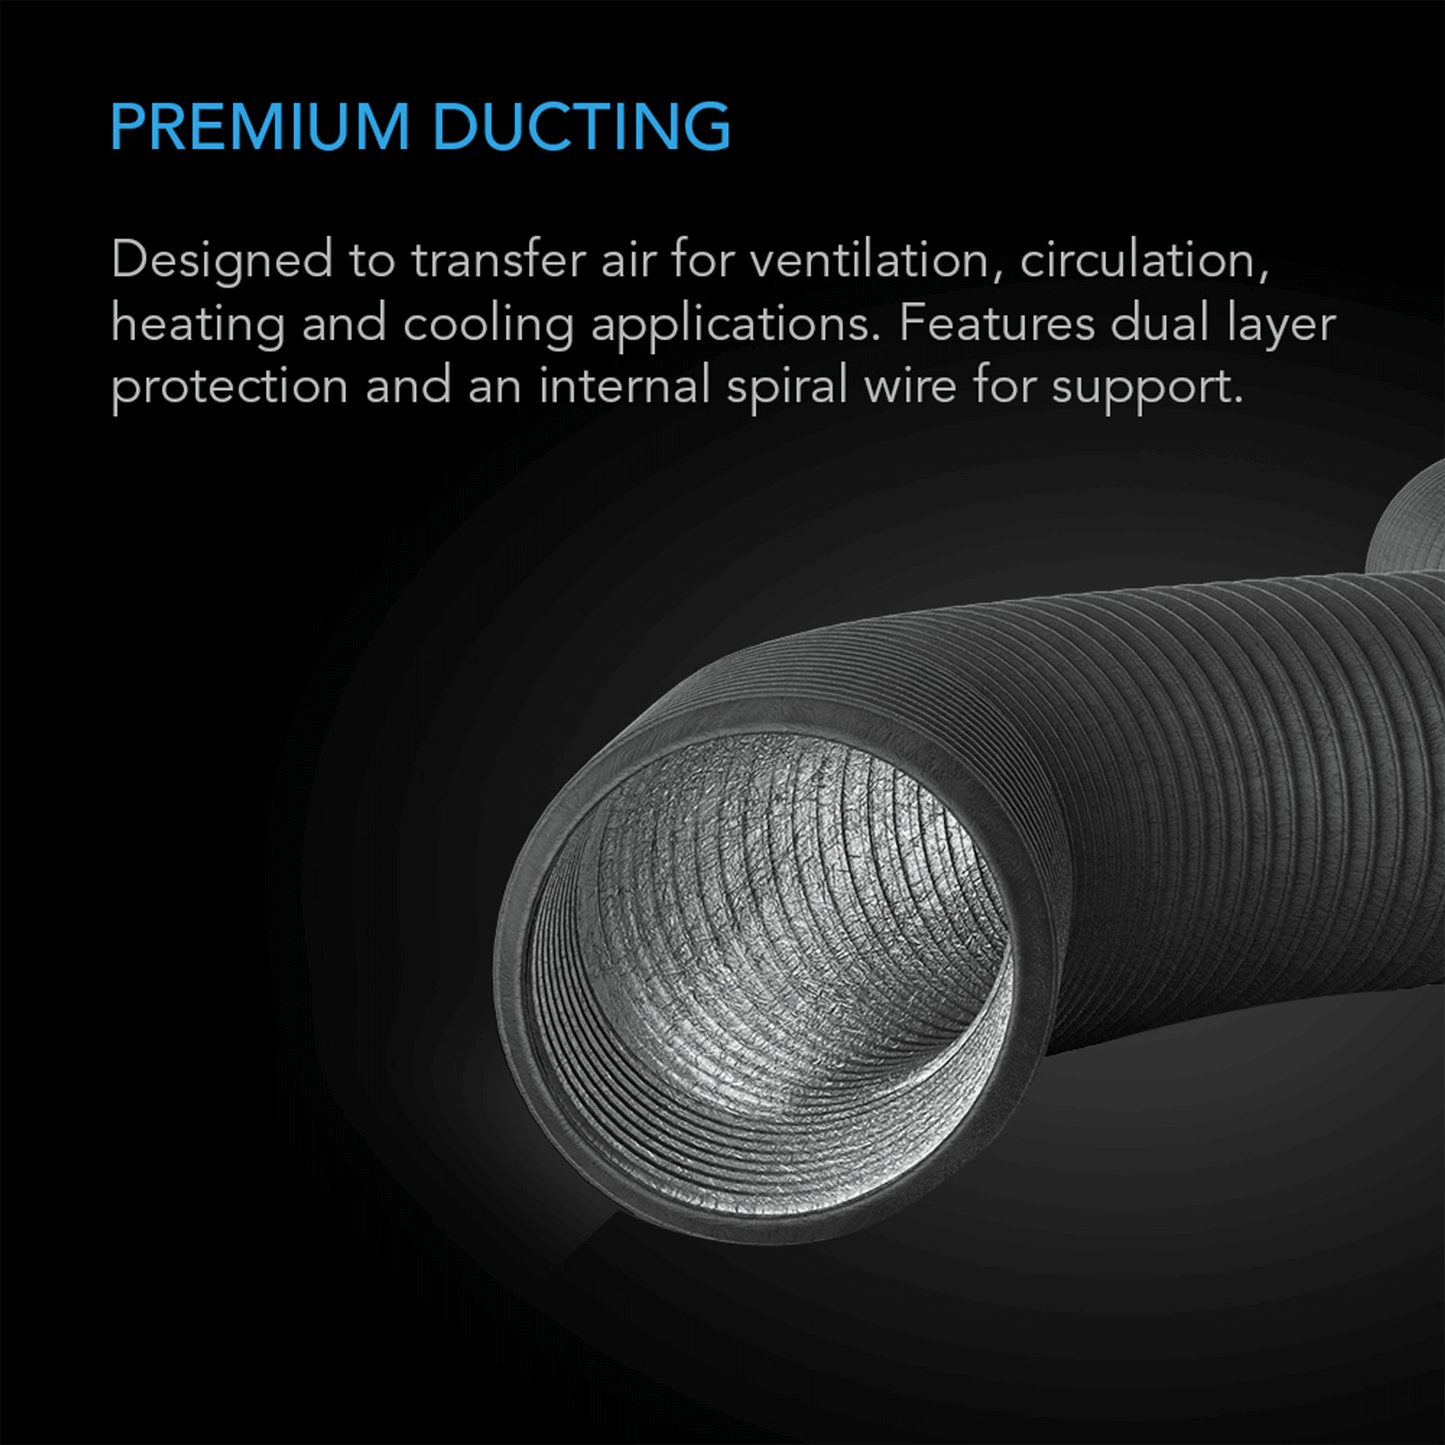 AC Infinity Flexible Four-Layer Ducting, 8-FT Long, 8-Inch | AI-DTA8-8 | Grow Tents Depot | Climate Control | 819137021044